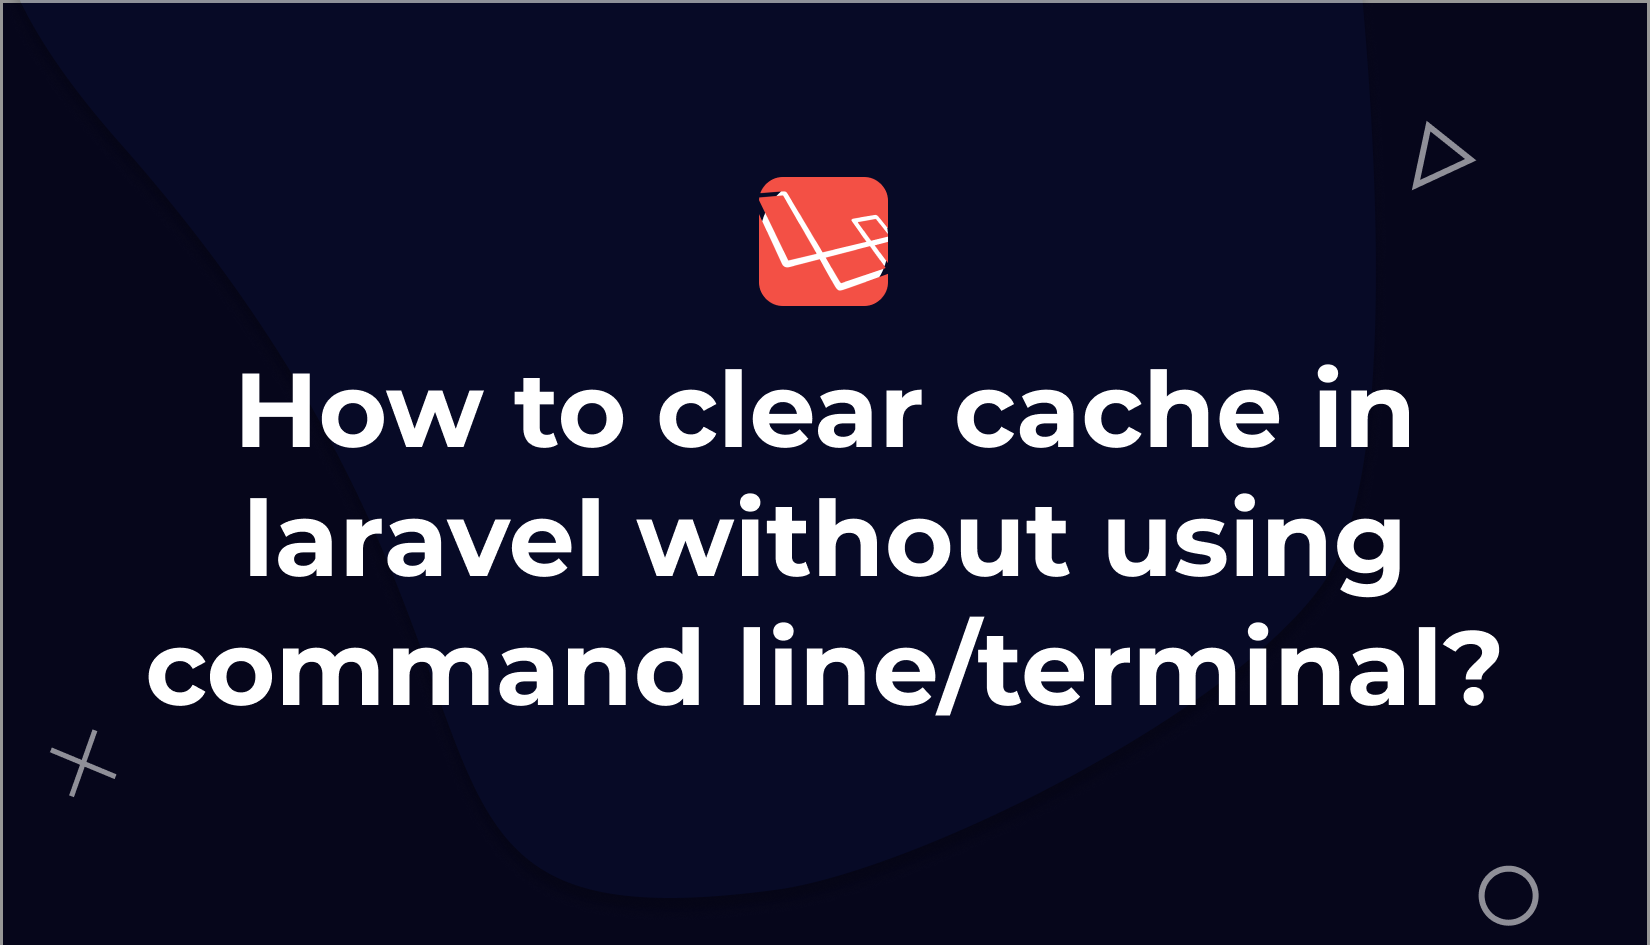 How to clear cache in laravel without using command line/terminal?